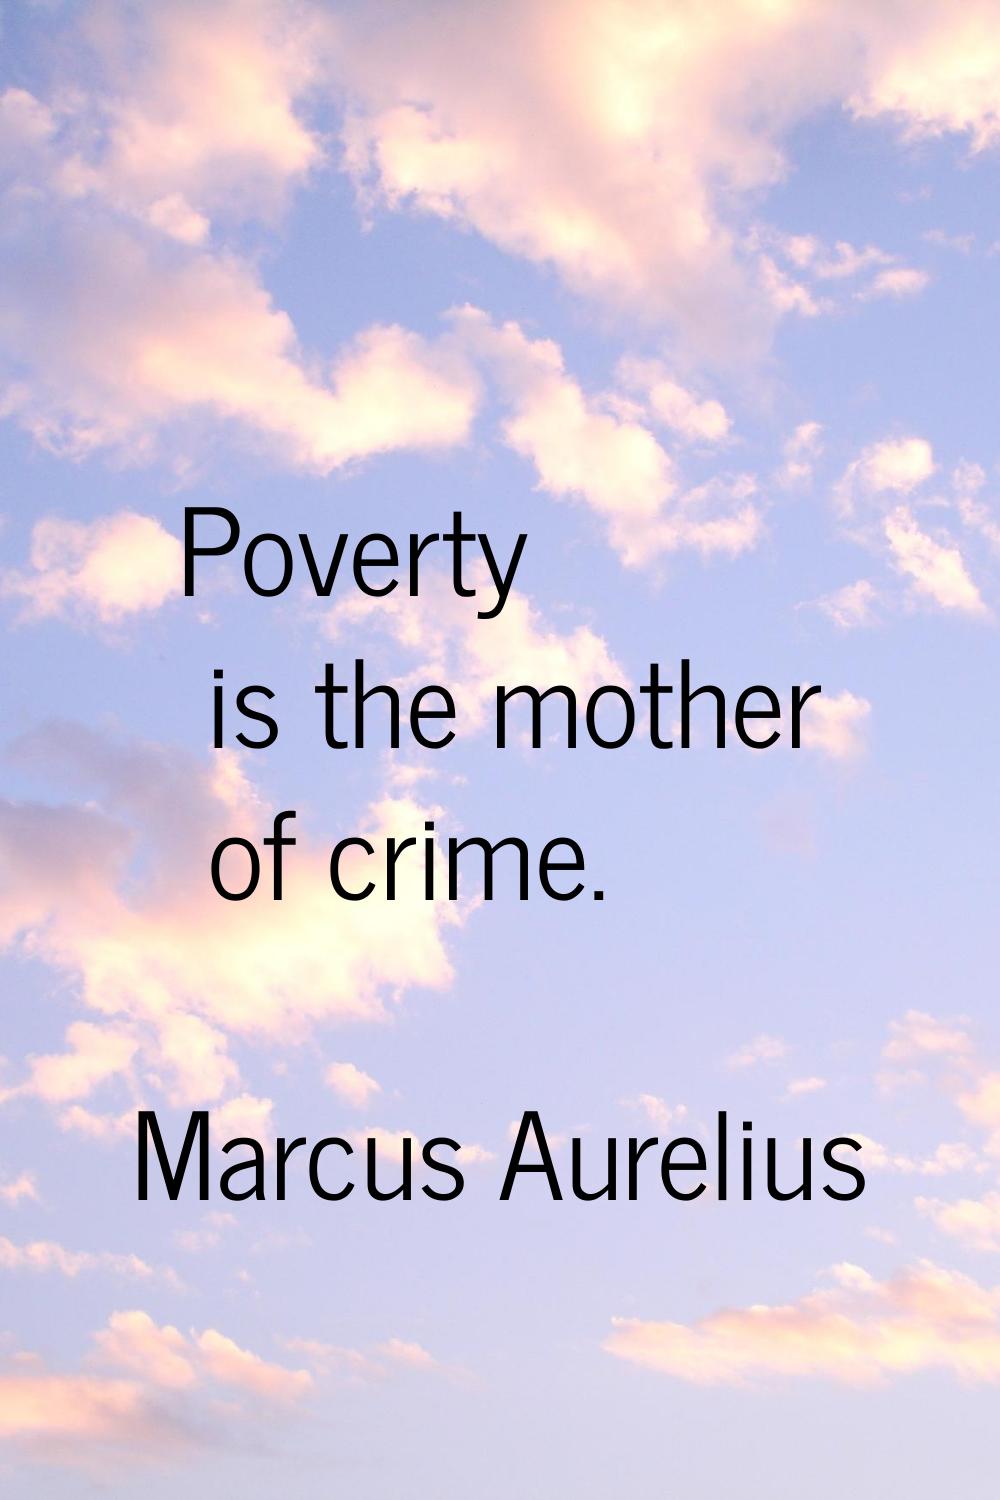 Poverty is the mother of crime.